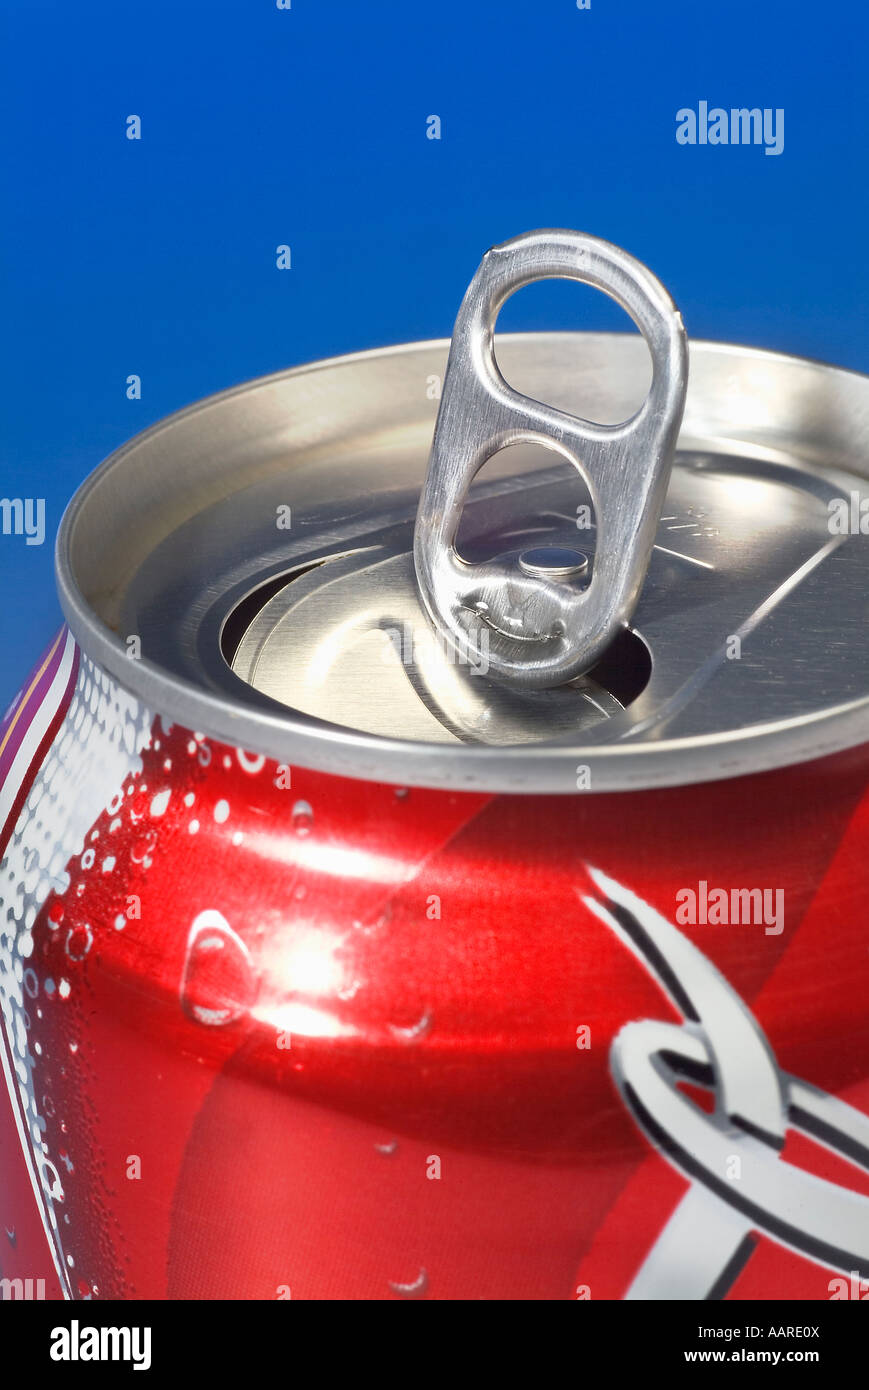 Leverage Opening Soda Can Stock Photo